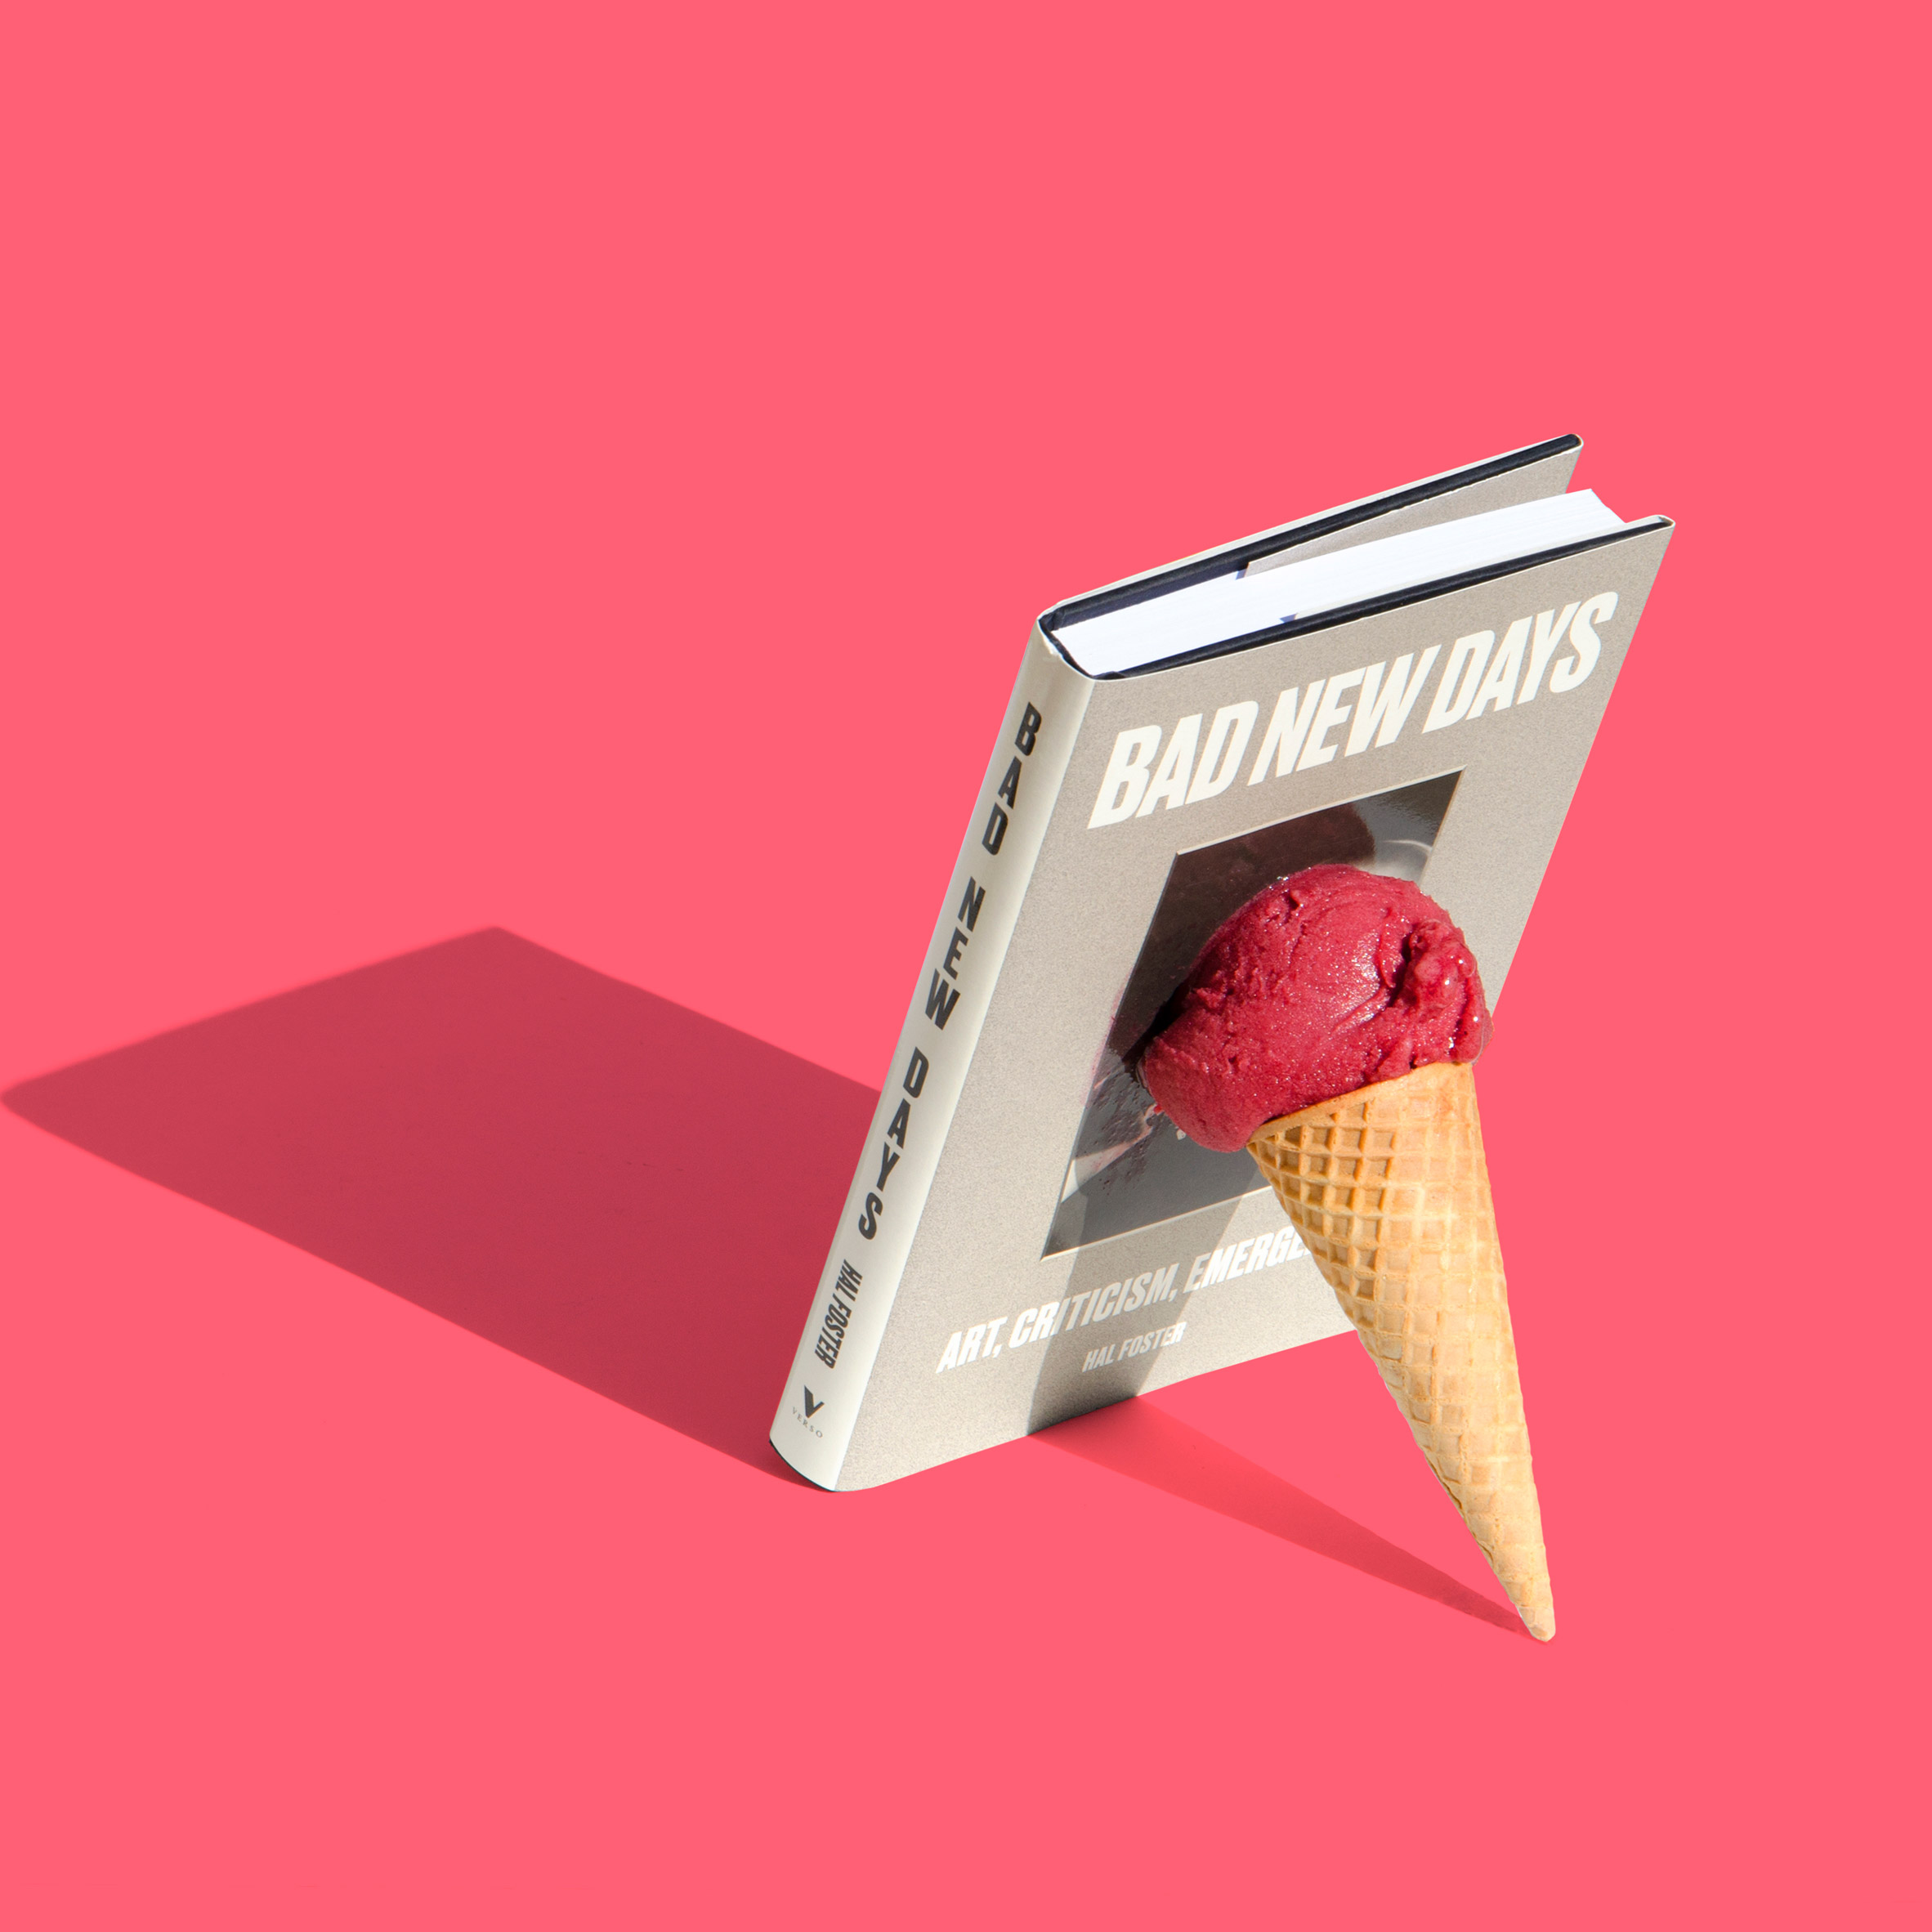 Ben Denzer marries ice cream with books in summery photography series